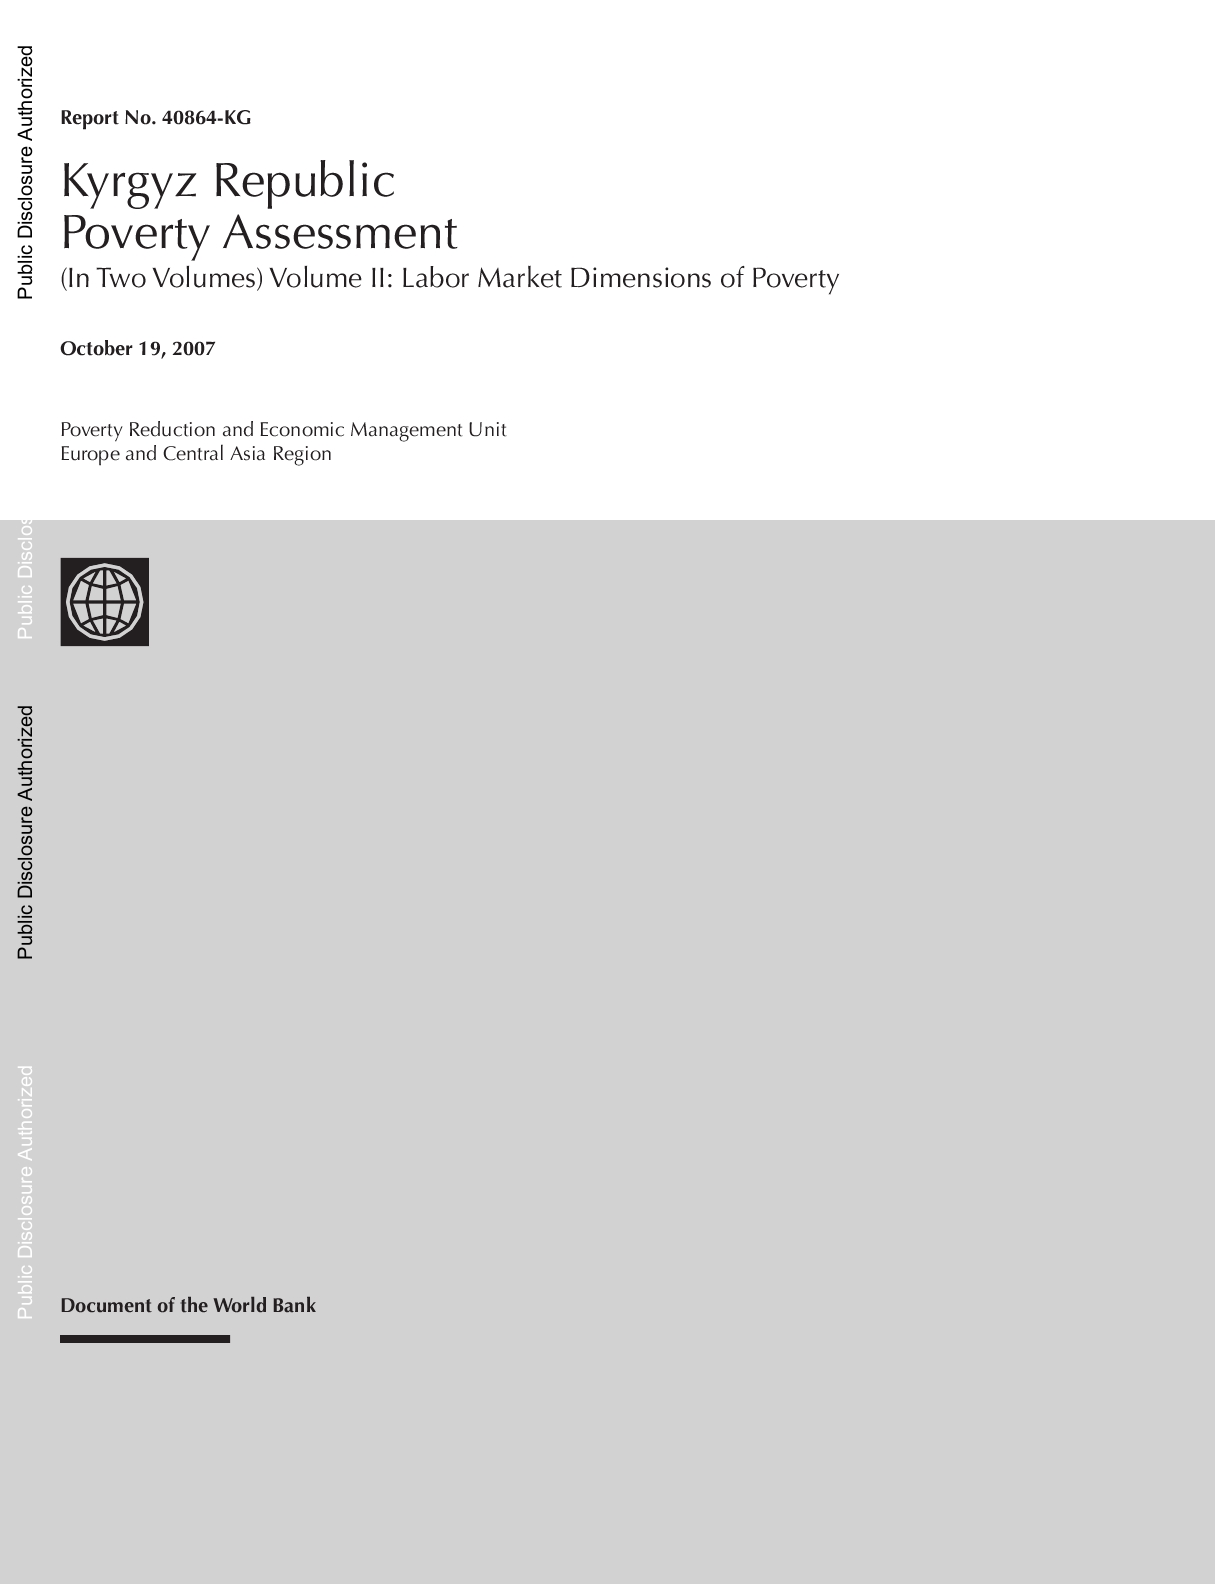 This report, which has been prepared by the World Bank in cooperation with the National Statistical Committee, provides an assessment of poverty in the Kyrgyz Republic using the most recent data available. The objective of this report is to understand to what extent economic growth has reduced poverty and led to improved living conditions for the population during 2000-2005. The report also attempts to answer three questions about the Kyrgyz Republic: what is the profile of poor? How has economic growth affected the level and composition of poverty? How has the labor market contributed to changes in poverty? The report is divided into two volumes. The first volume begins with this chapter which provides an international comparison of social and other key indicators of the Kyrgyz Republic followed by a profile of the poor based upon 2005 household survey data. The second chapter analyzes the linkages between growth and poverty during 2000-2005. The third chapter provides our key findings of labor market outcomes and poverty and what the implications are for policy making. The final chapter synthesizes the information from the earlier chapters and provides some policy directions. The second volume provides a more thorough analysis of labor markets. It covers developments in the labor market, urban labor markets, rural labor markets and differences between men and women in the labor market.<div>Source: <a href="http://documents.worldbank.org/curated/en/2007/10/8607059/kyrgyz-republic-poverty-assessment-vol-2-2-labor-market-dimensions-poverty">World Bank</a></div>